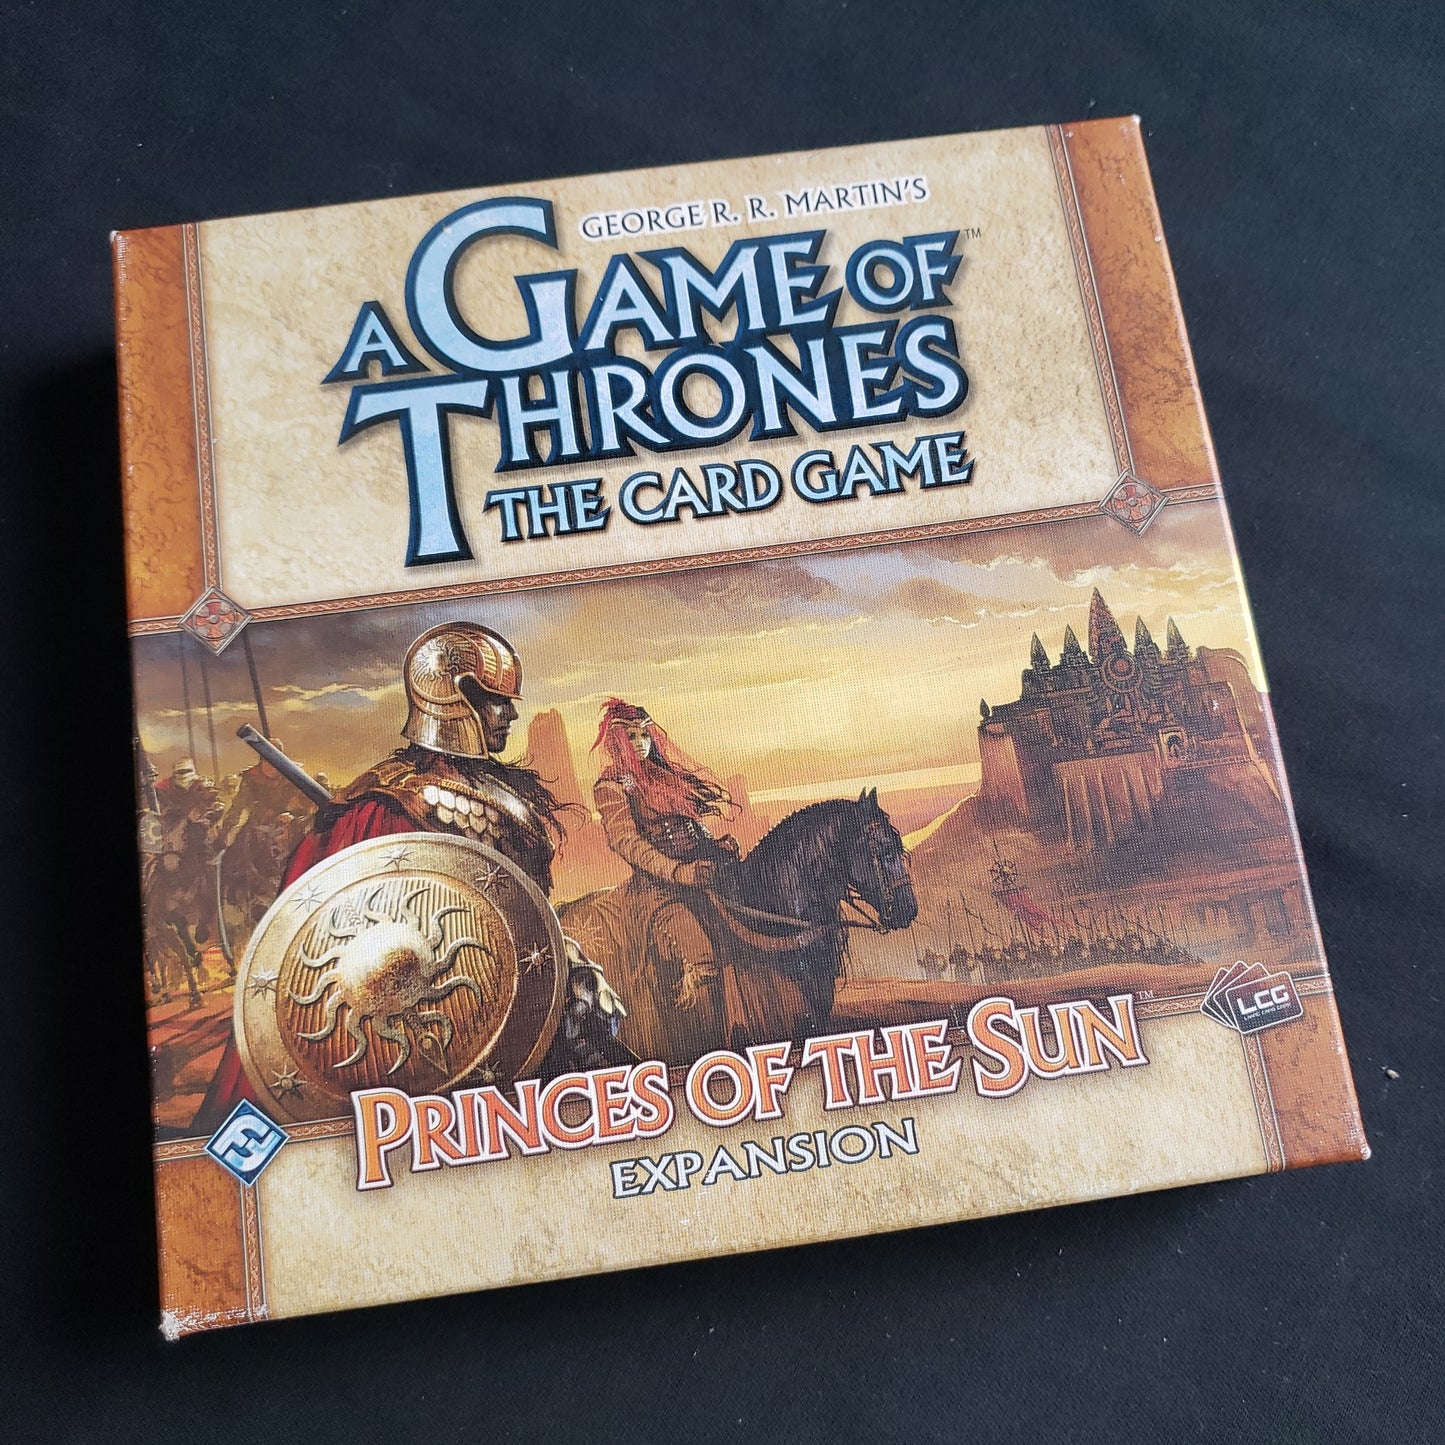 Image shows the front cover of the box of the Princes of the Sun expansion for the Game of Thrones card game